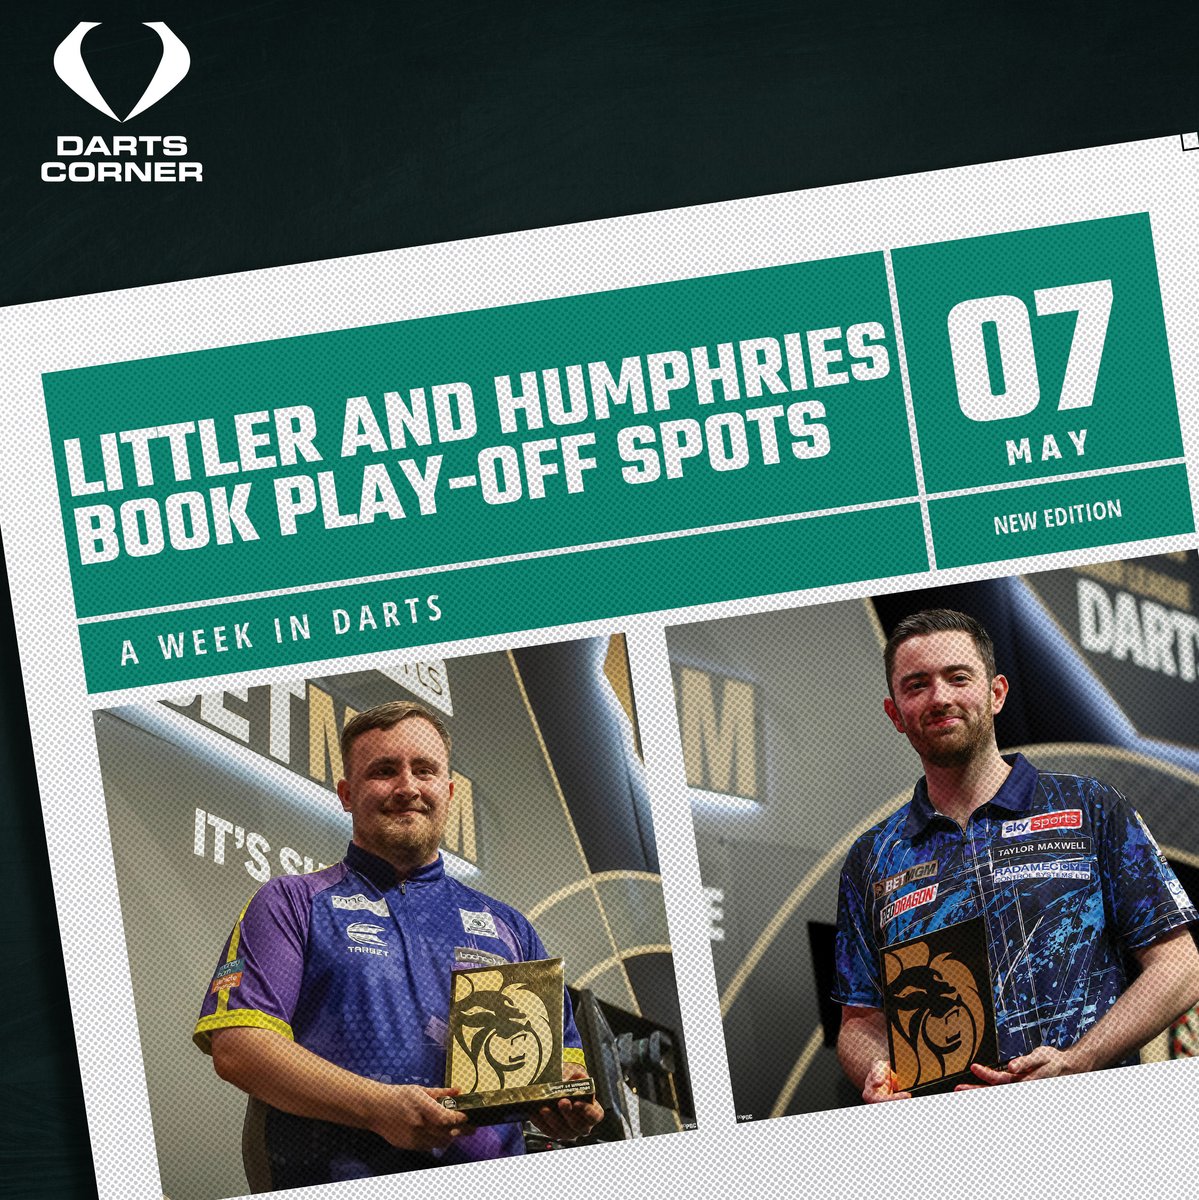 The first two players have been confirmed for the Premier League Play-Offs at The O2. Here’s our recap of all things darts over the last seven days👇 dartscorner.co.uk/blogs/news/may… ✅ Two Lukes book play-off spots 🐂 Smith gets back to winning ways 👦 Titles shared on Development Tour